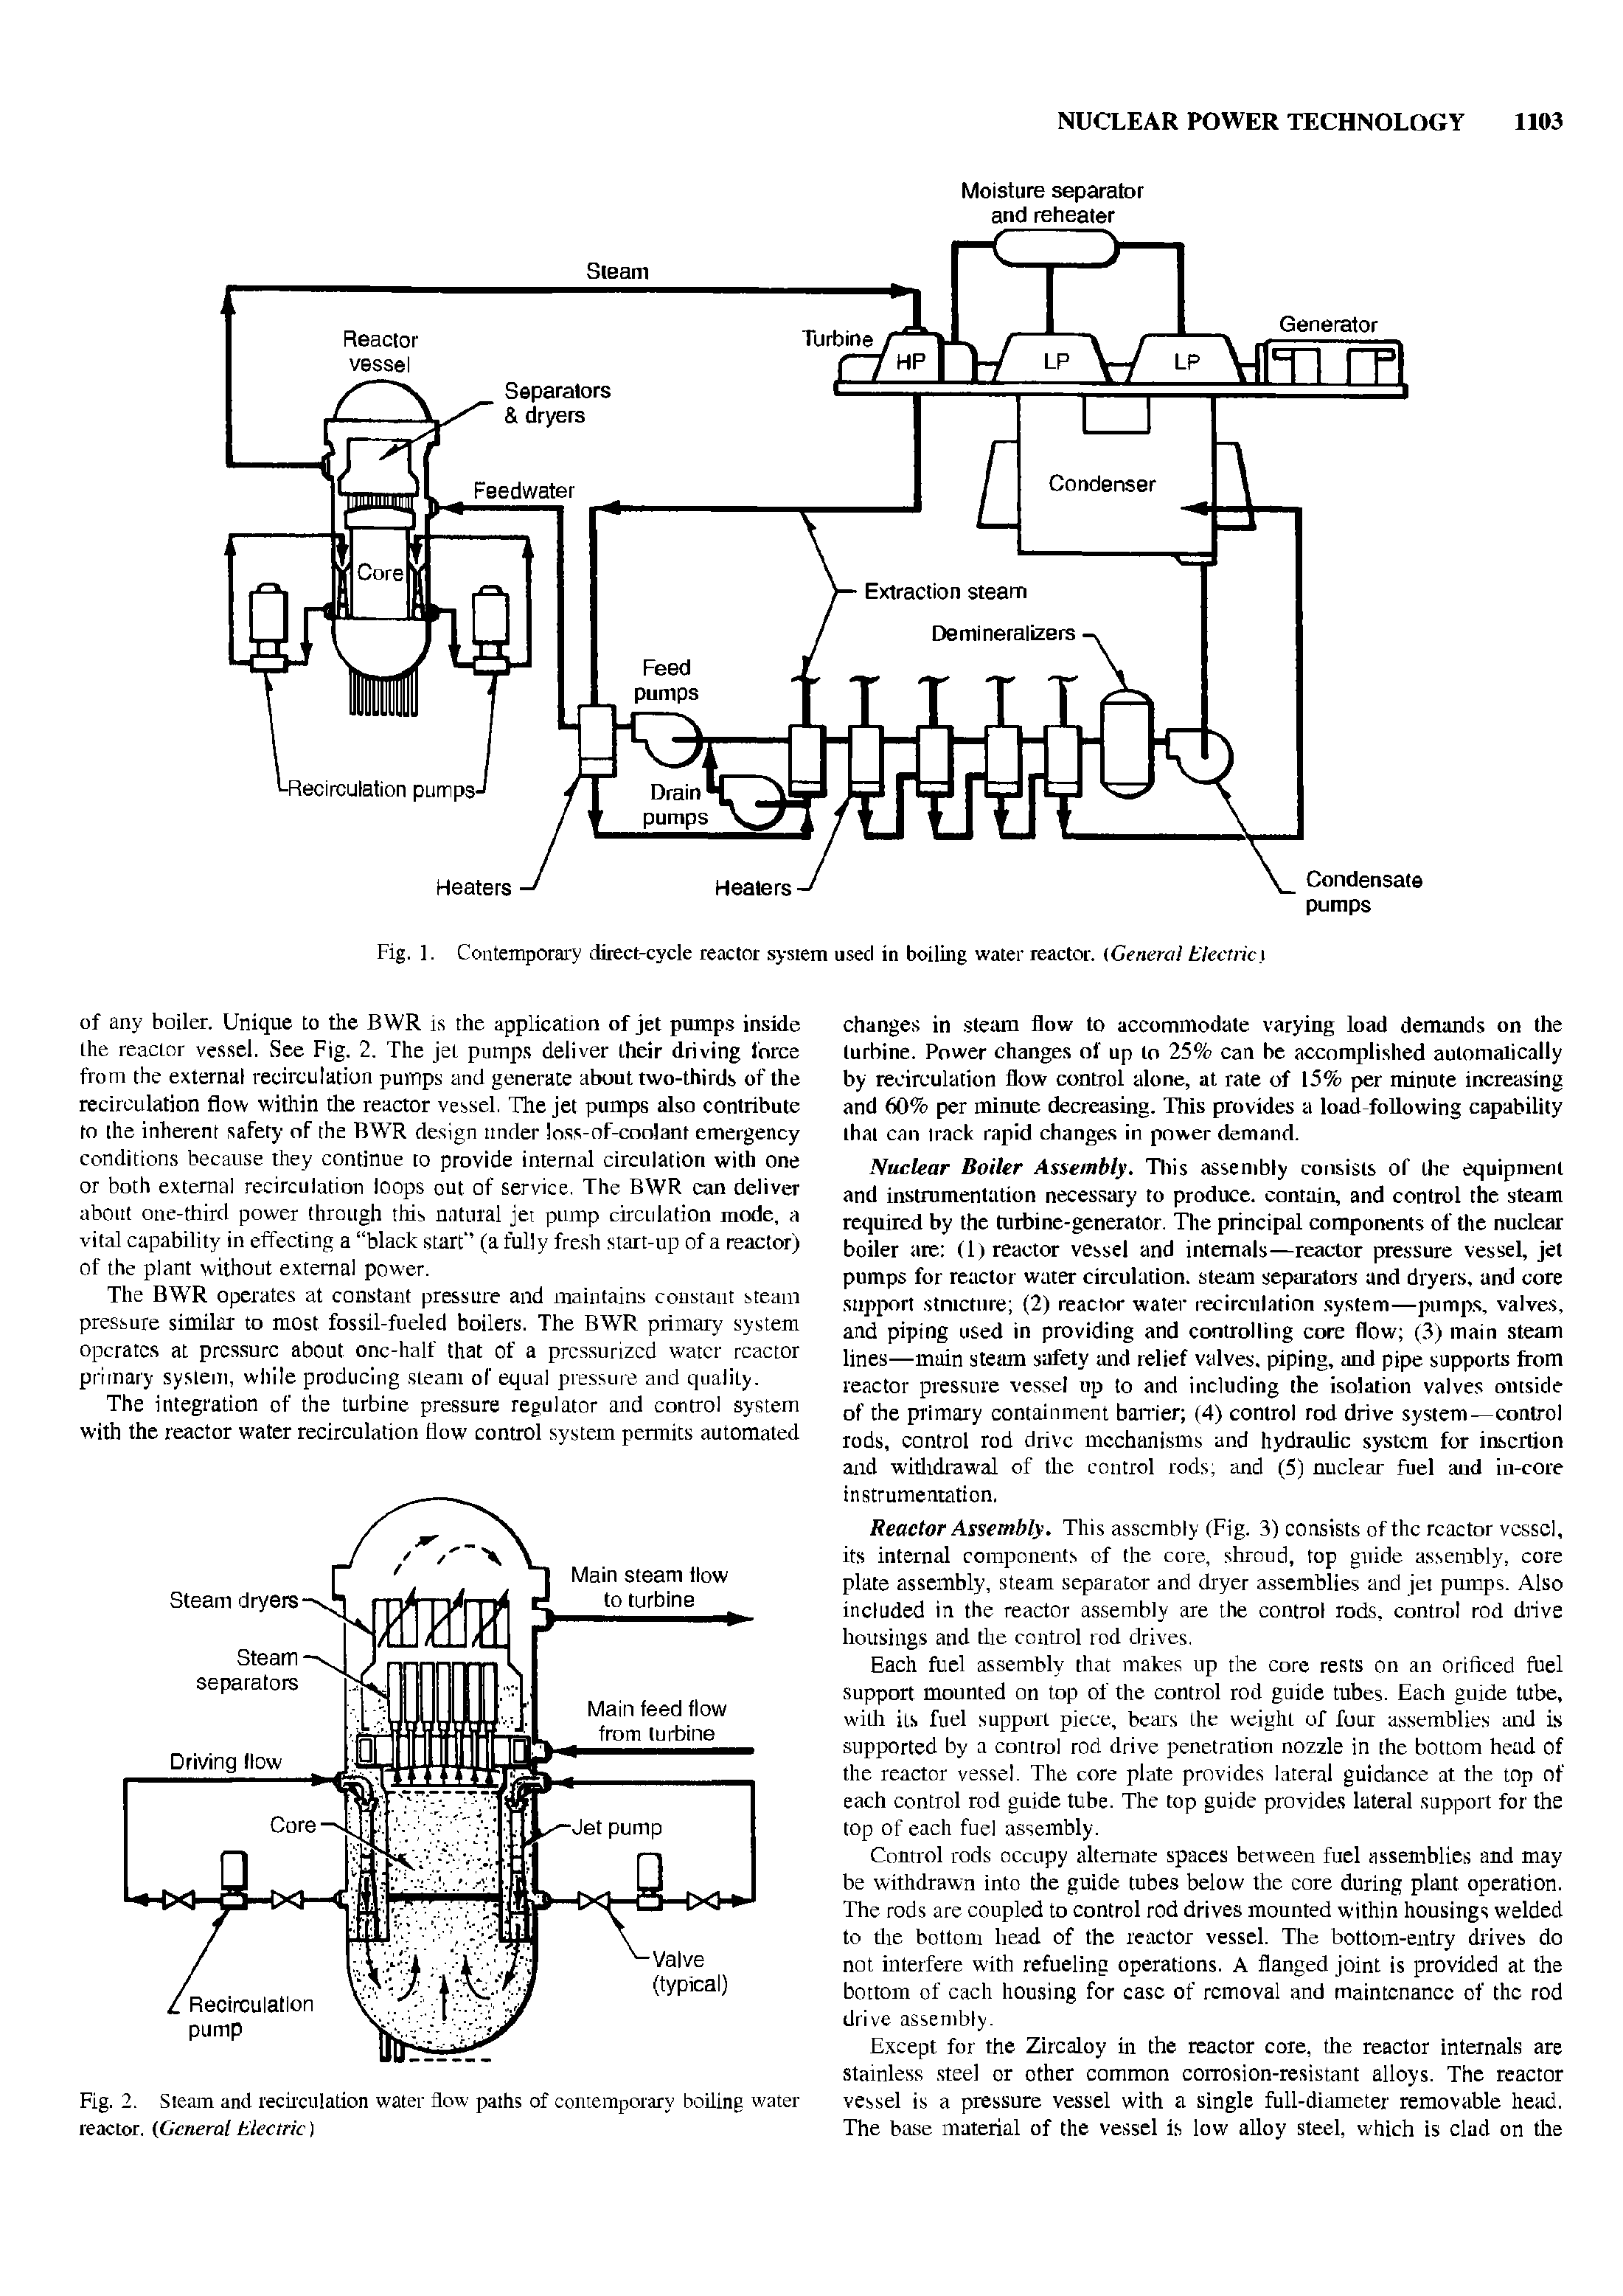 Fig. ]. Contemporary direct-cycle reactor system used in boiling water reactor. (General Electric.1...